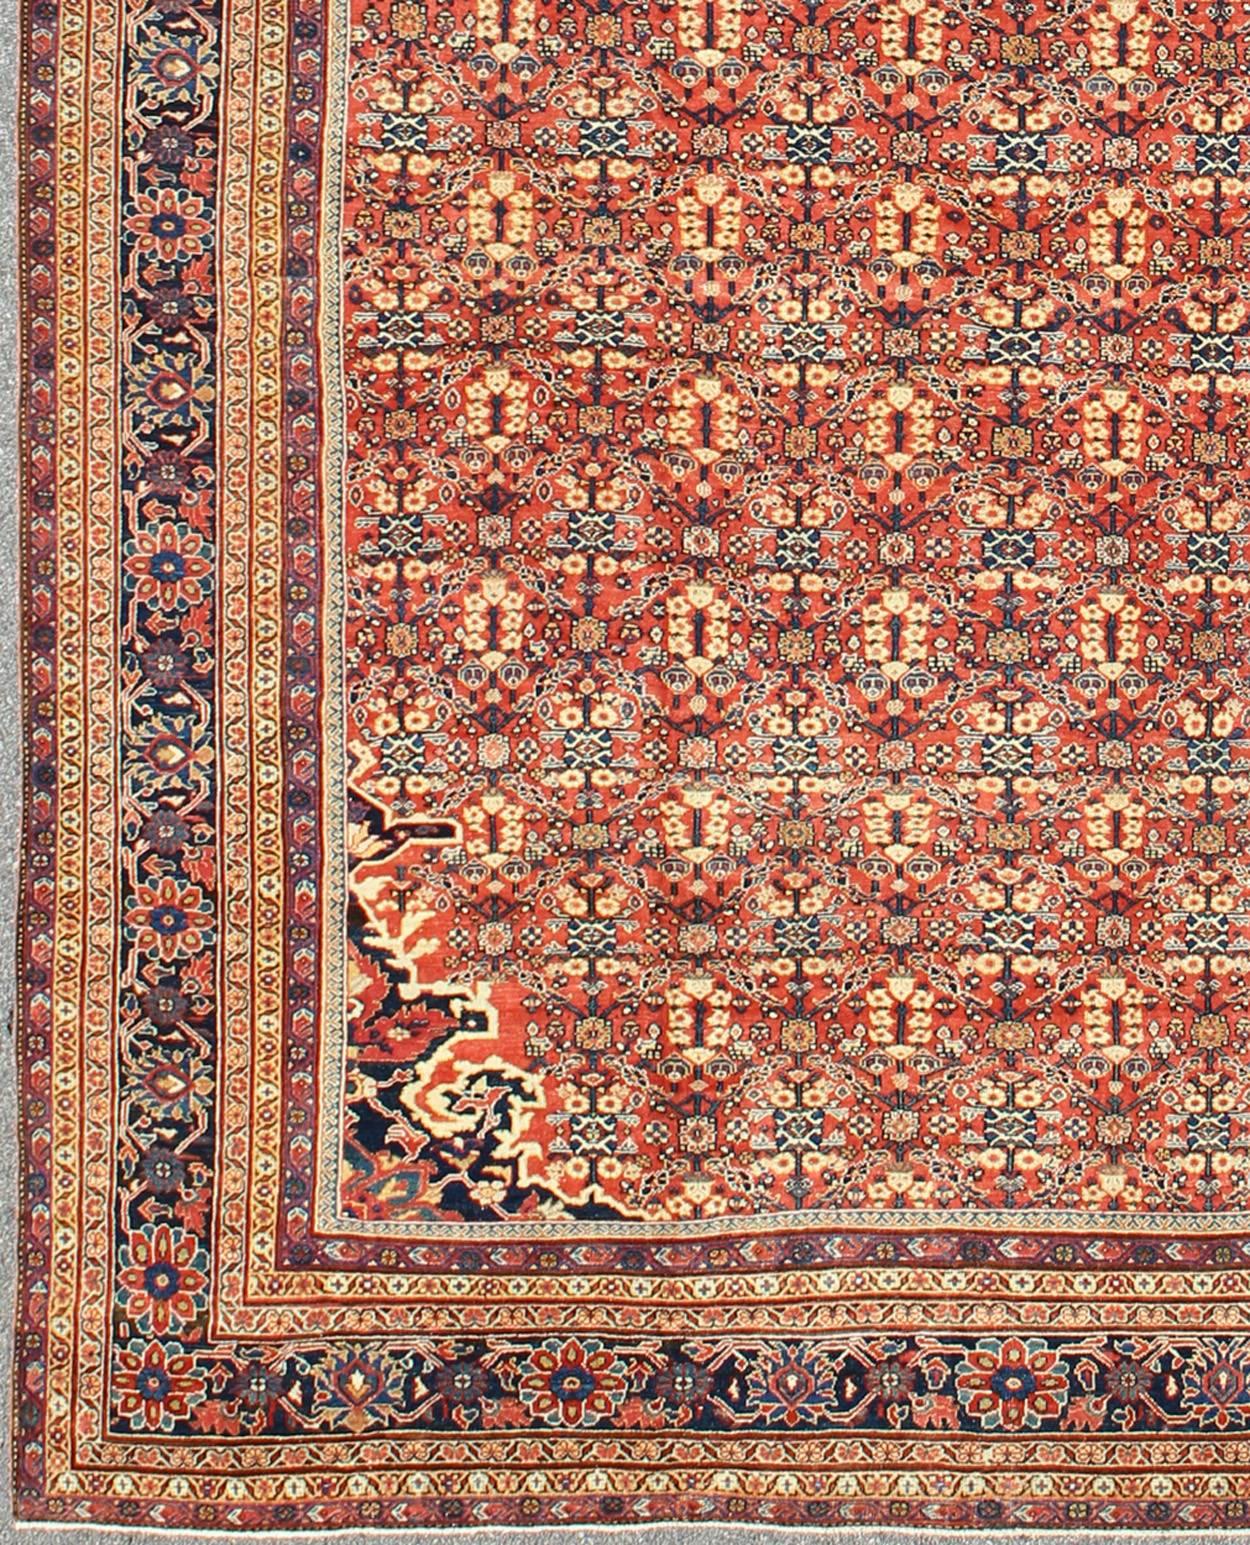 Antique Persian Sultanabad Rug with All Over Design in Soft Red, Blue and Cream, Rug / J10-0601, Large Sultanabad Persian Antique rug 
This antique Sultanabad beautifully illustrates the refined craftsmanship of turn-of-the-century Persian weavers